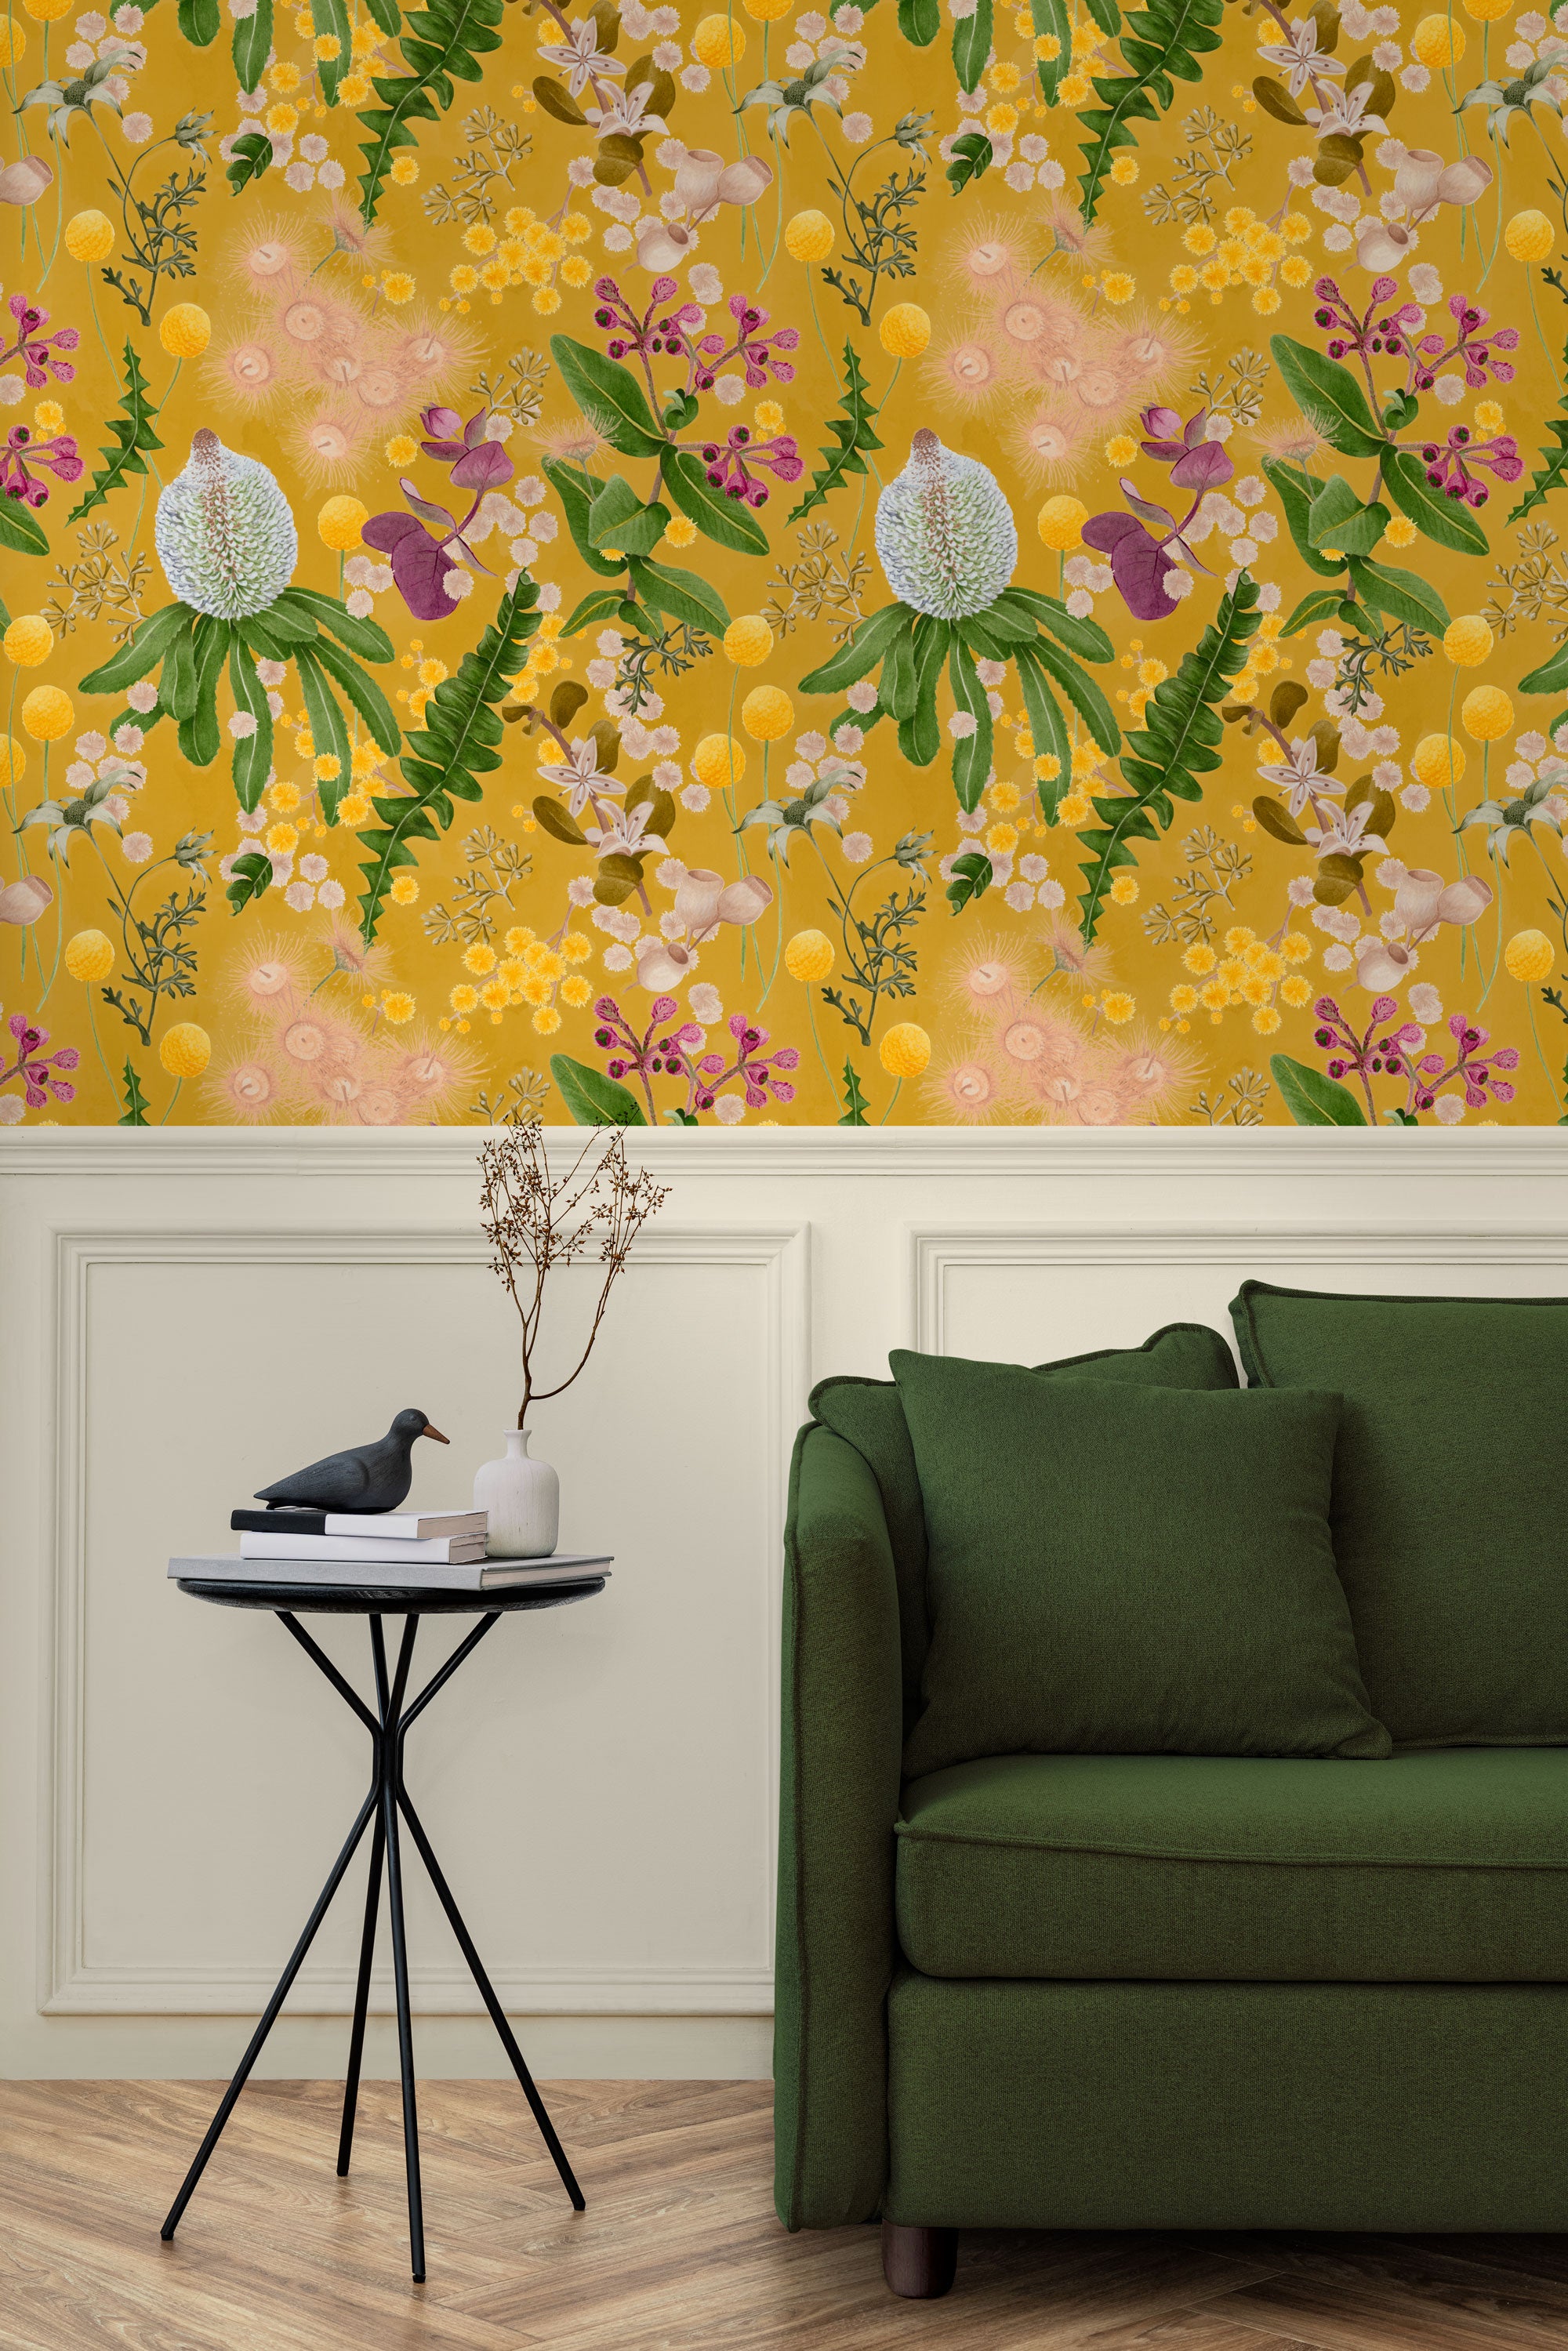 A maximalist living room with a wall papered in a large-scale botanical print in pink, yellow, green and mustard.